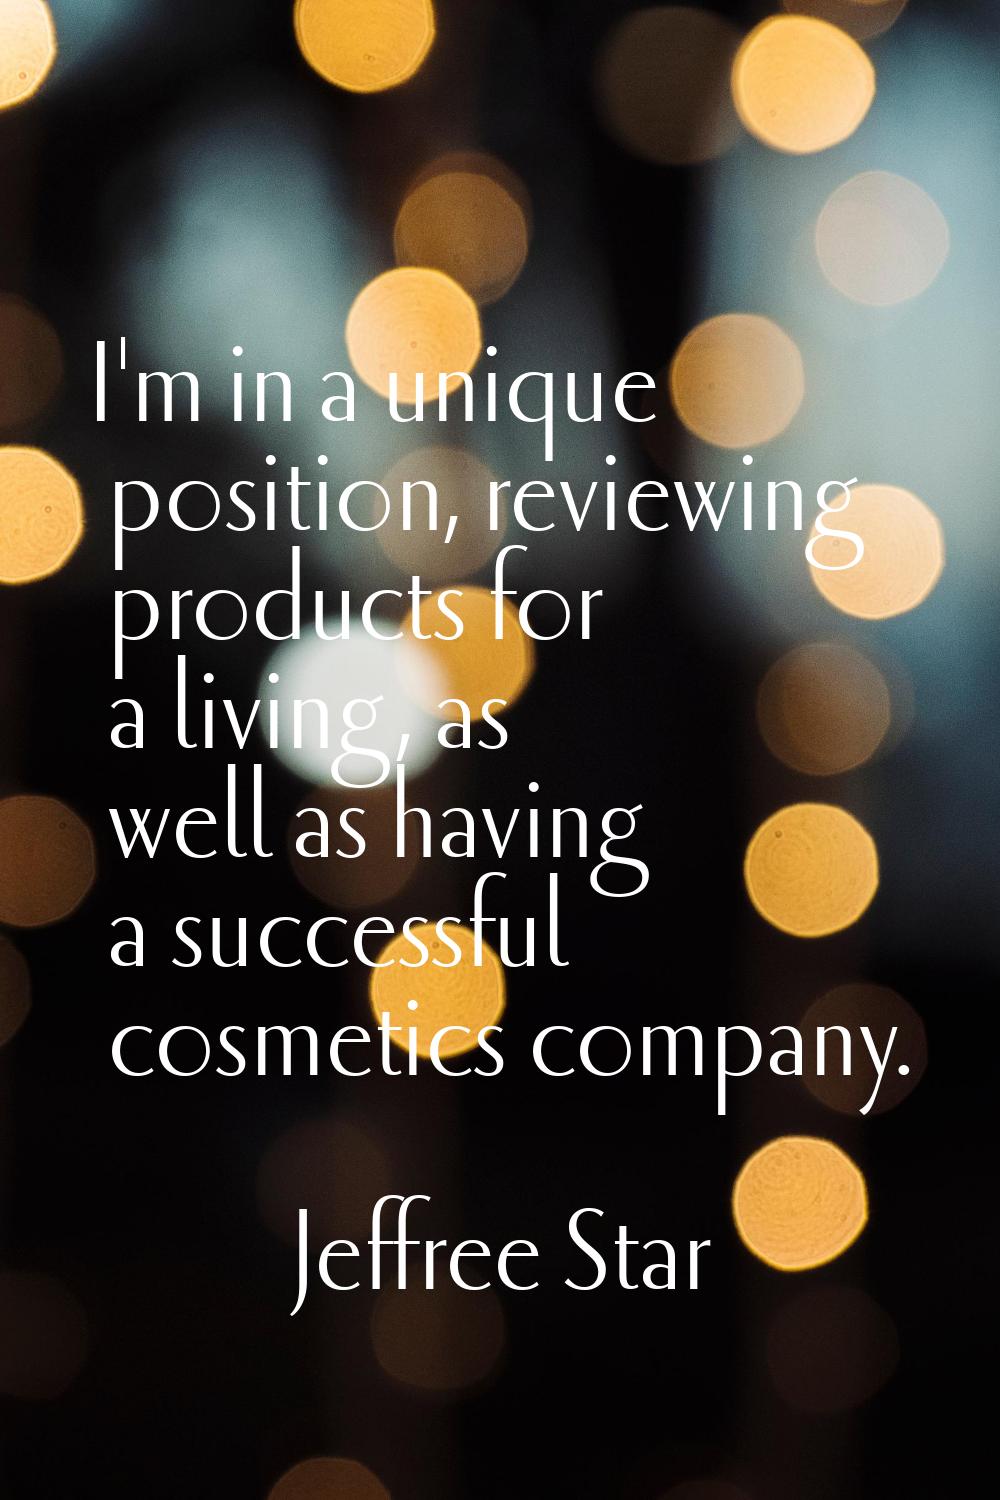 I'm in a unique position, reviewing products for a living, as well as having a successful cosmetics